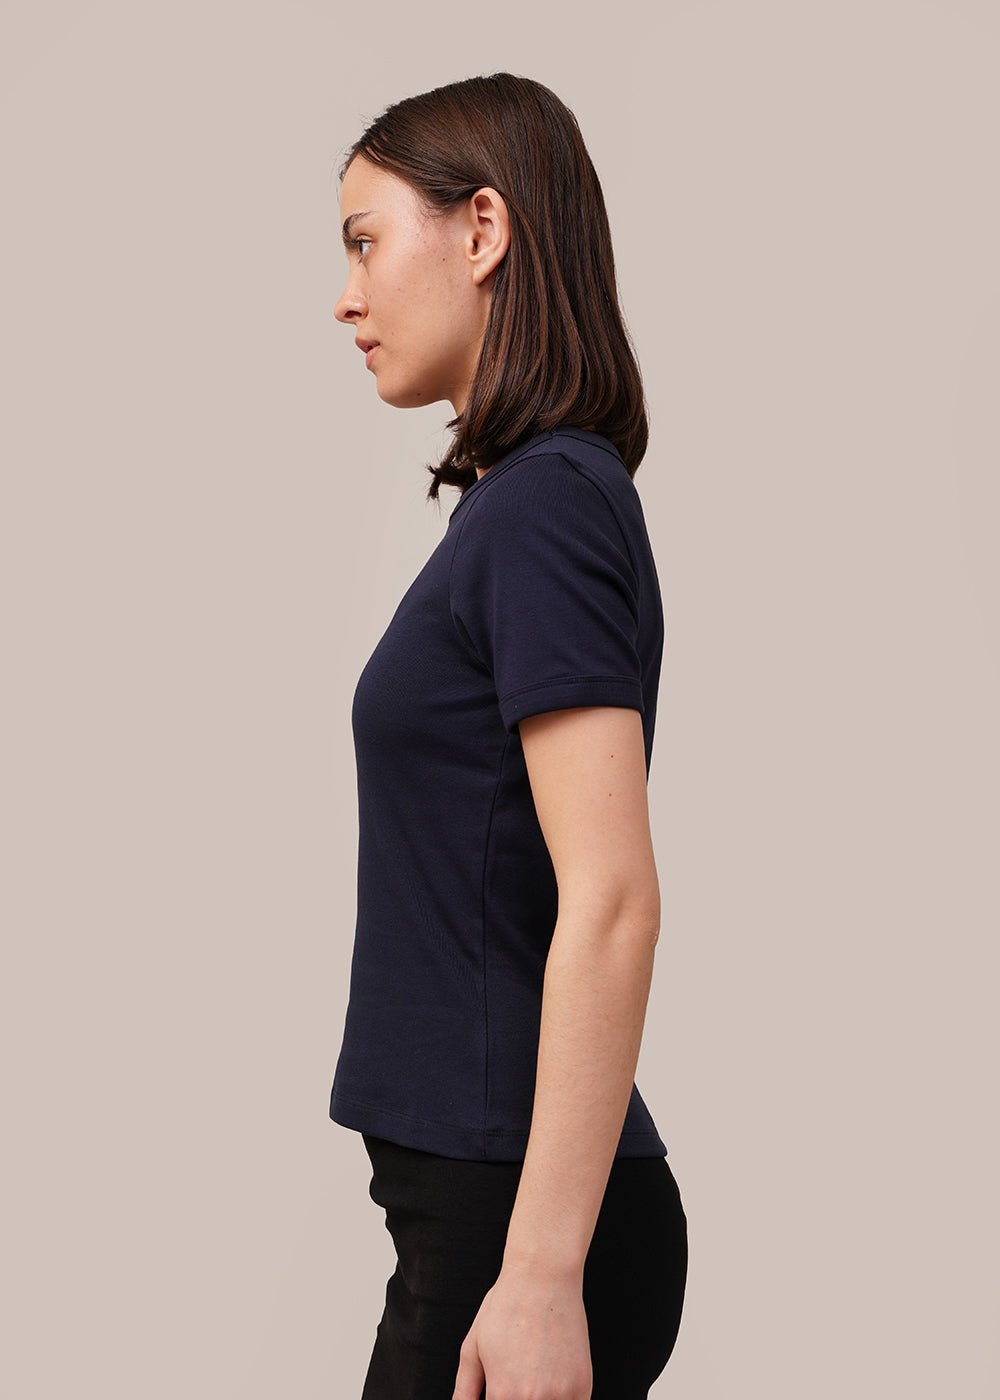 FLORE FLORE Navy Car Tee - New Classics Studios Sustainable Ethical Fashion Canada